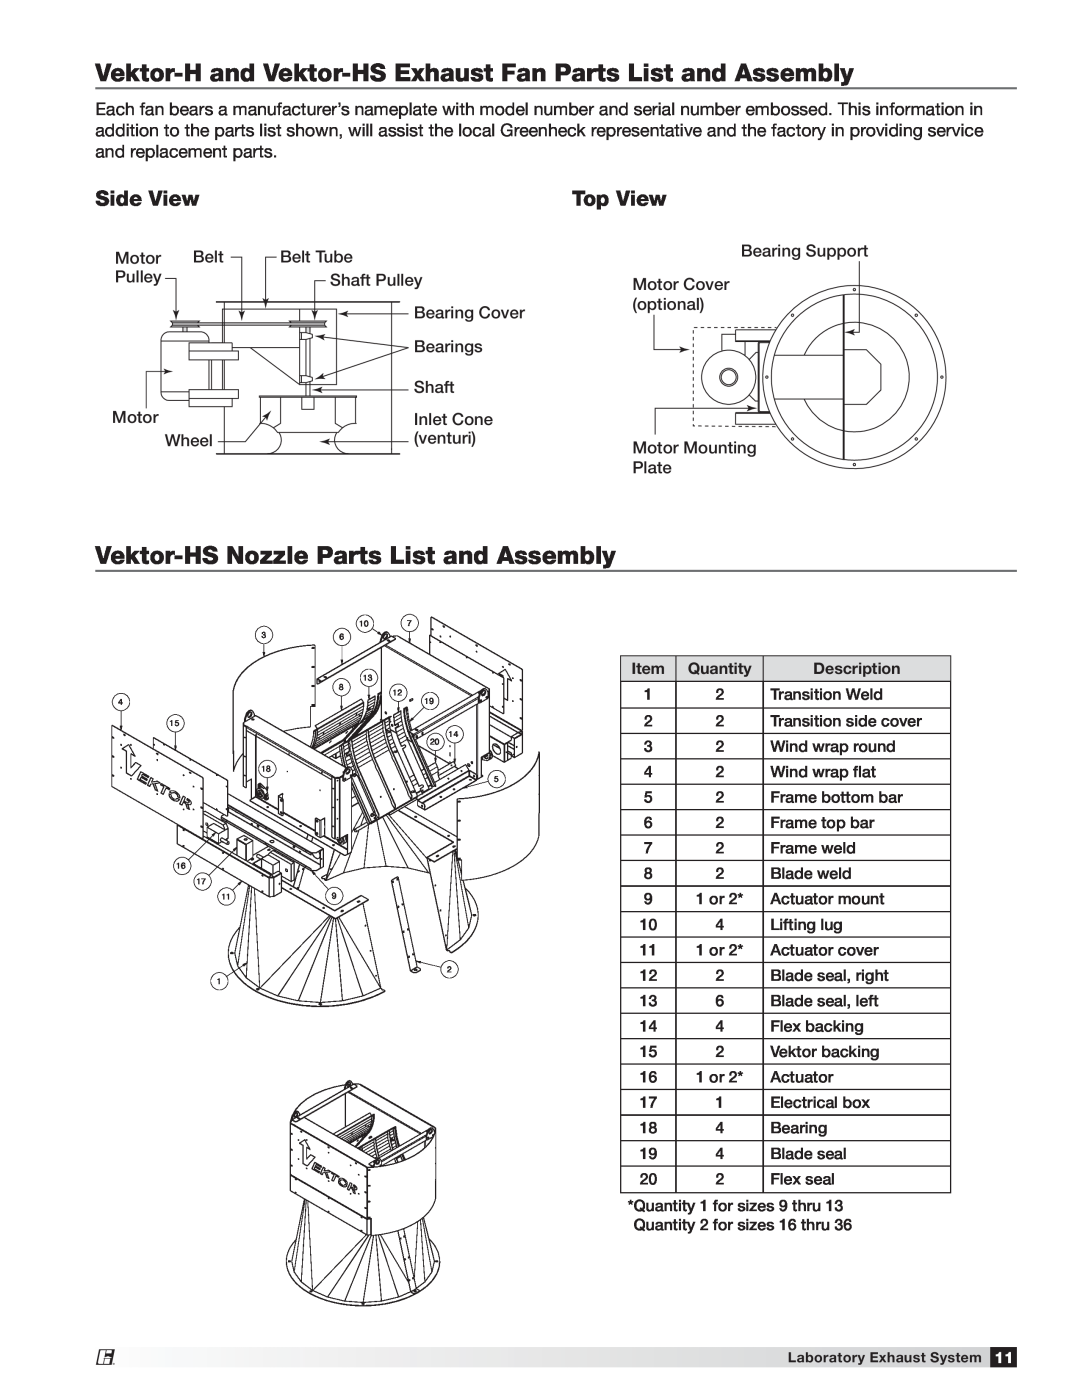 Greenheck Fan Vektor-H and Vektor-HS Exhaust Fan Parts List and Assembly, Vektor-HS Nozzle Parts List and Assembly 